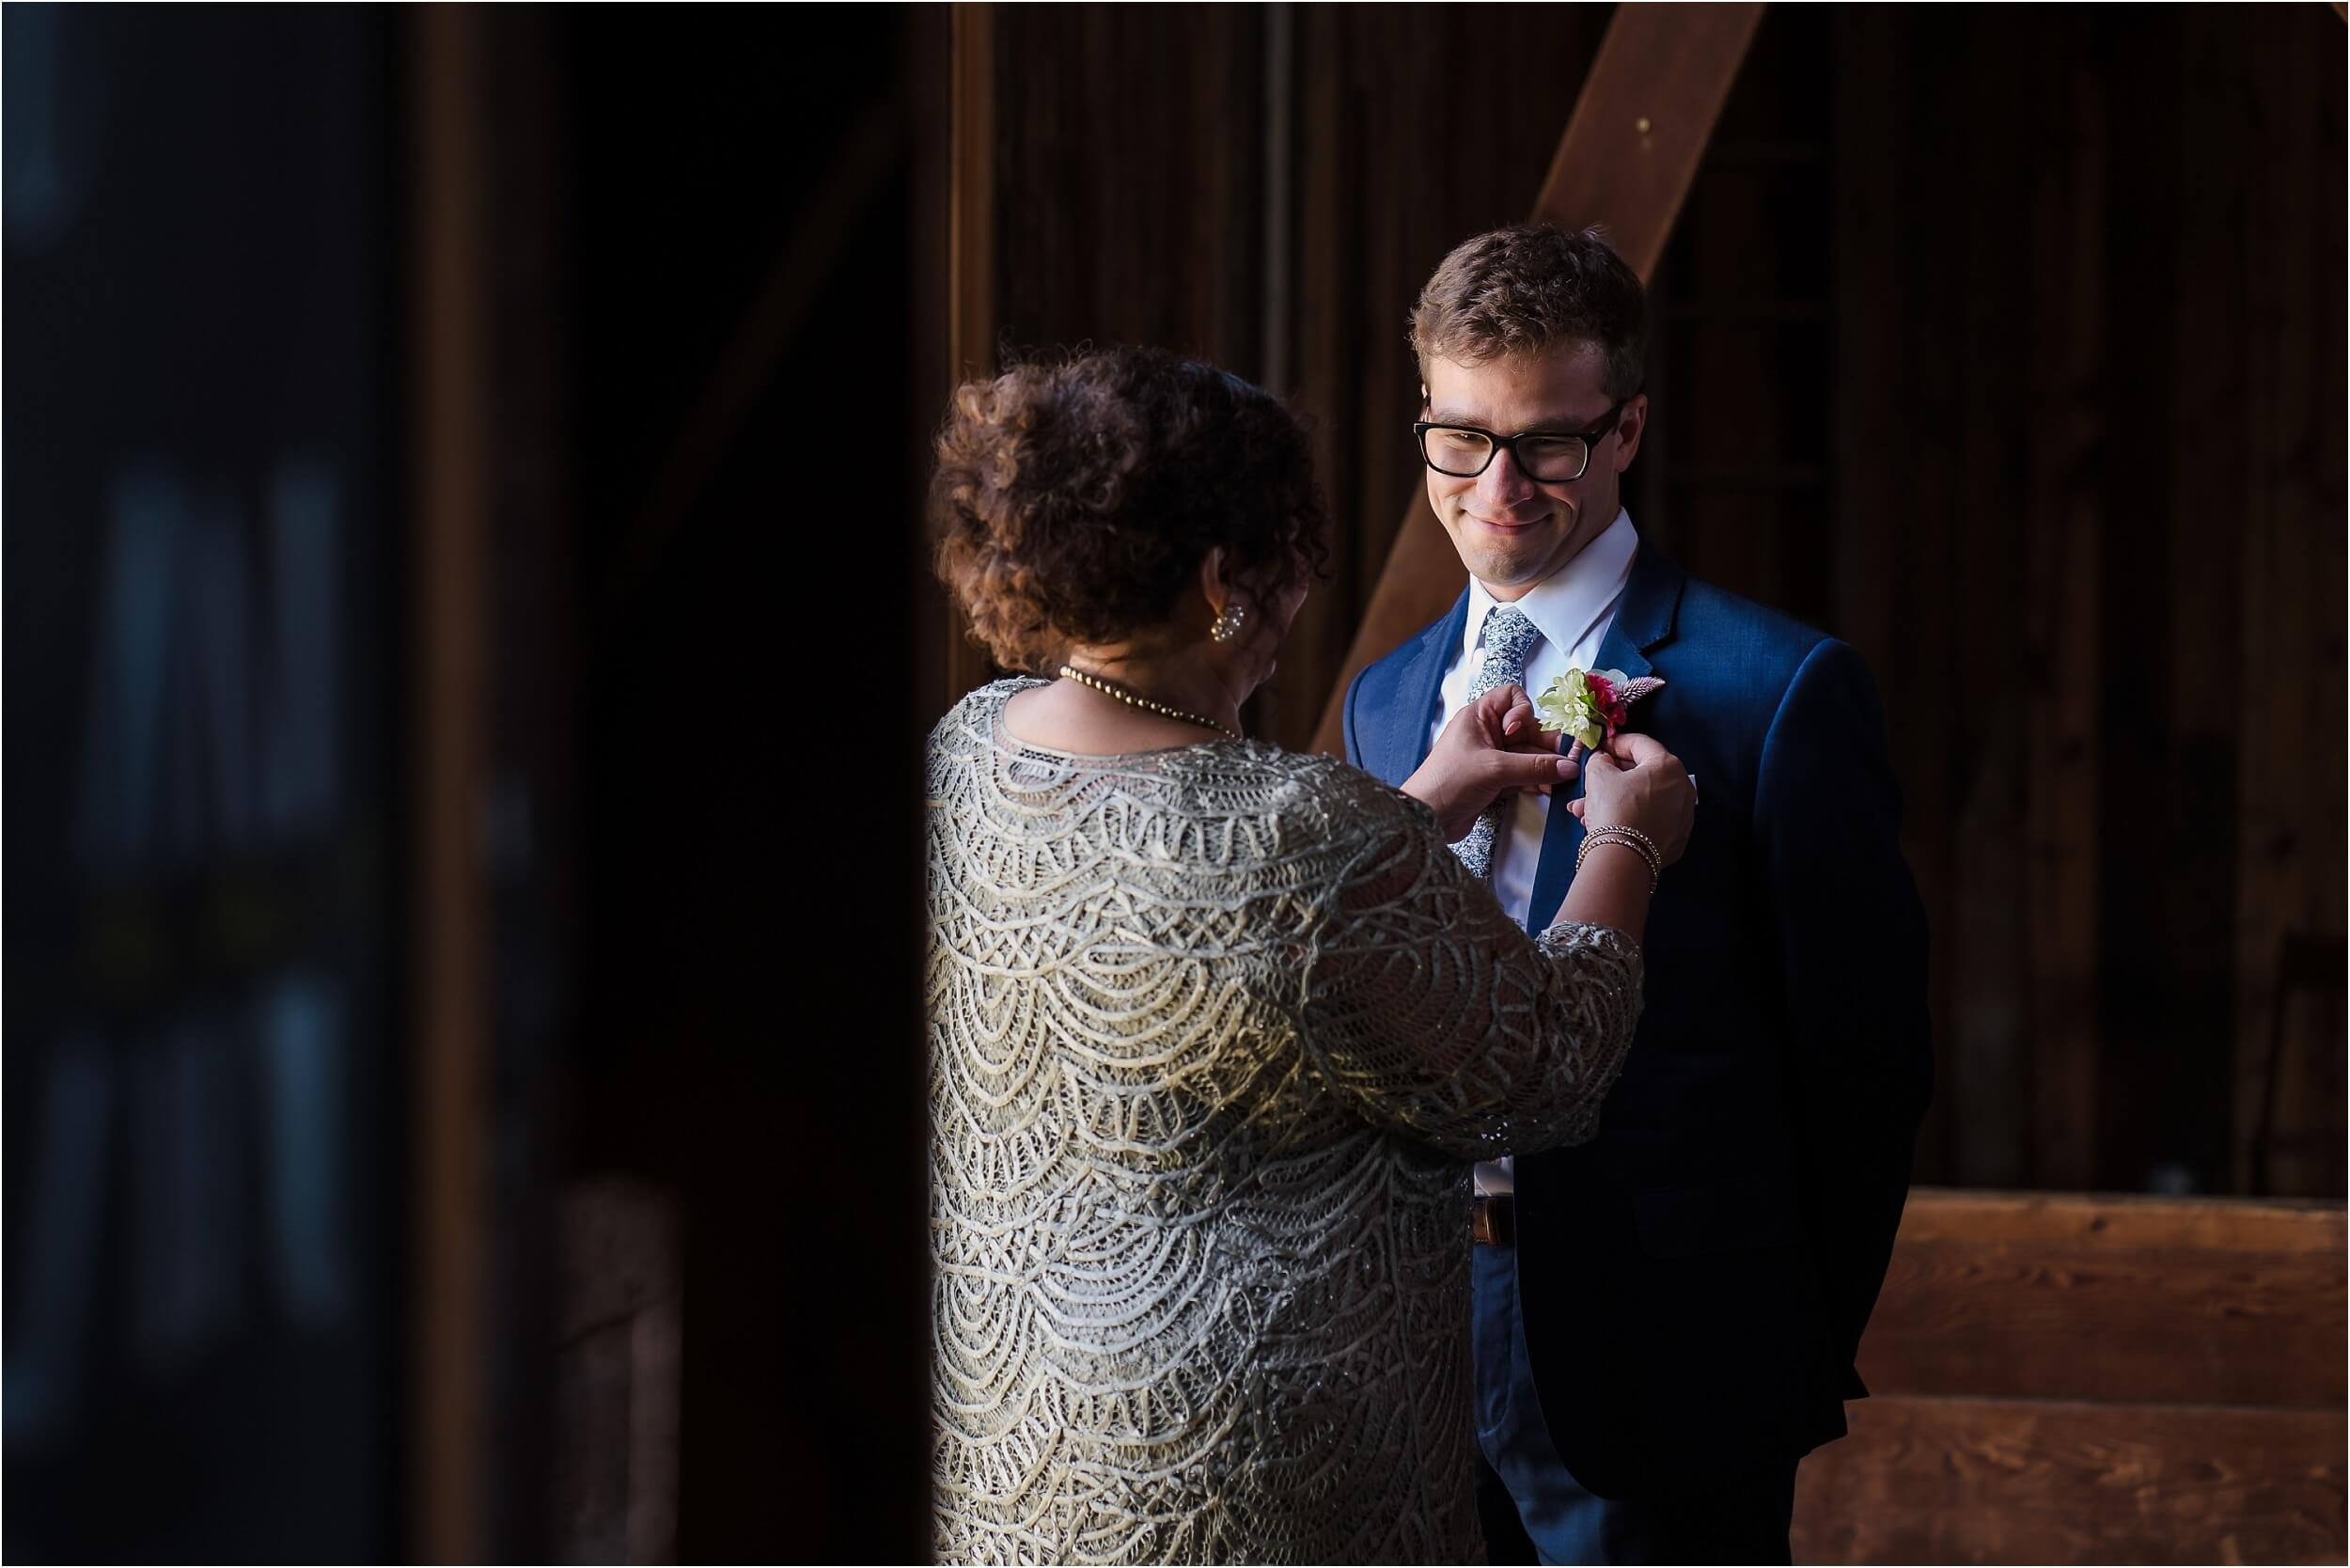  A groom’s mother helps her son get dressed before his wedding.  